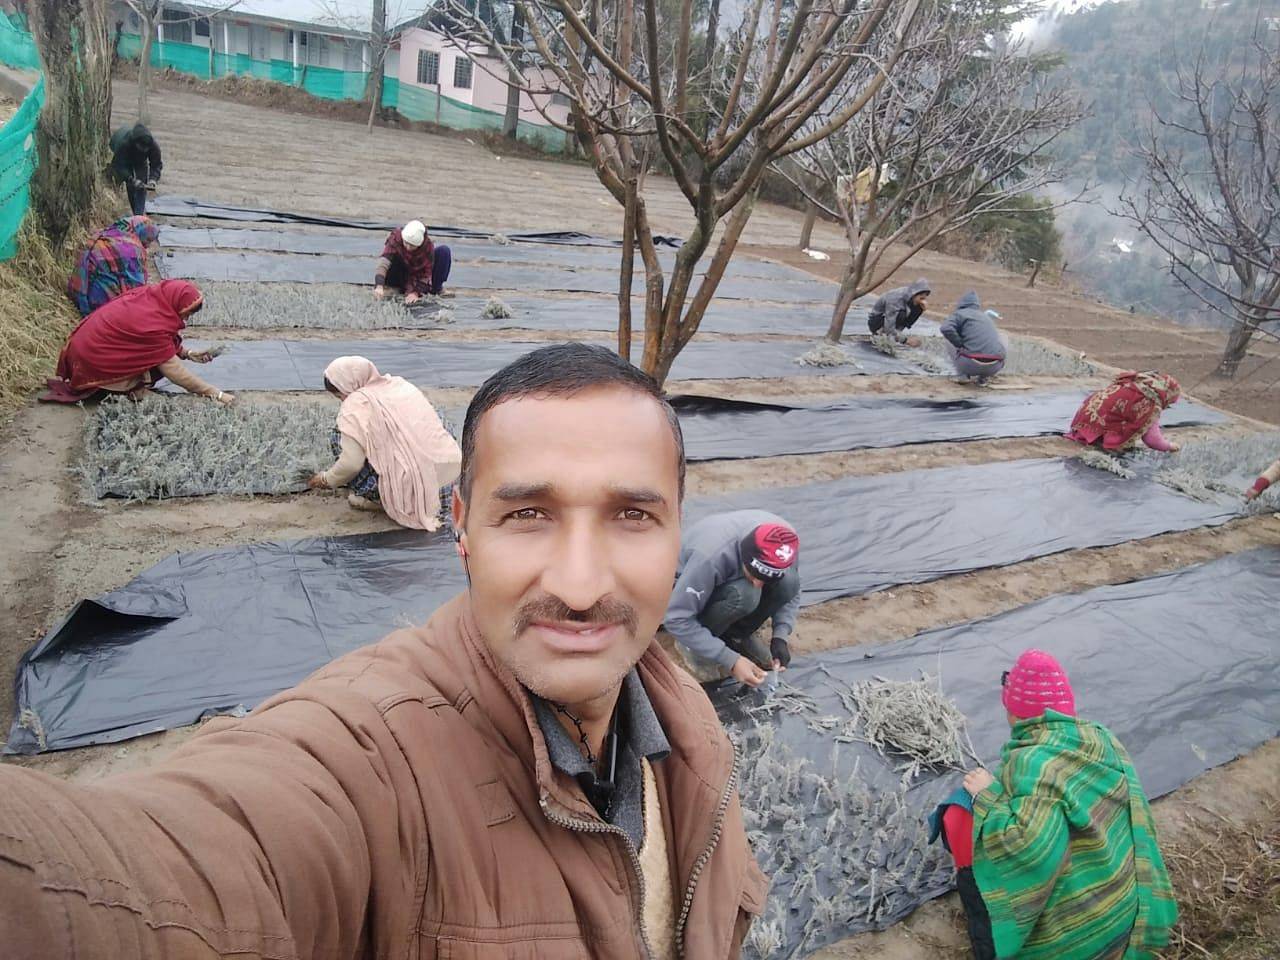 Bharat Bhushan on his Lavender Field with Workers